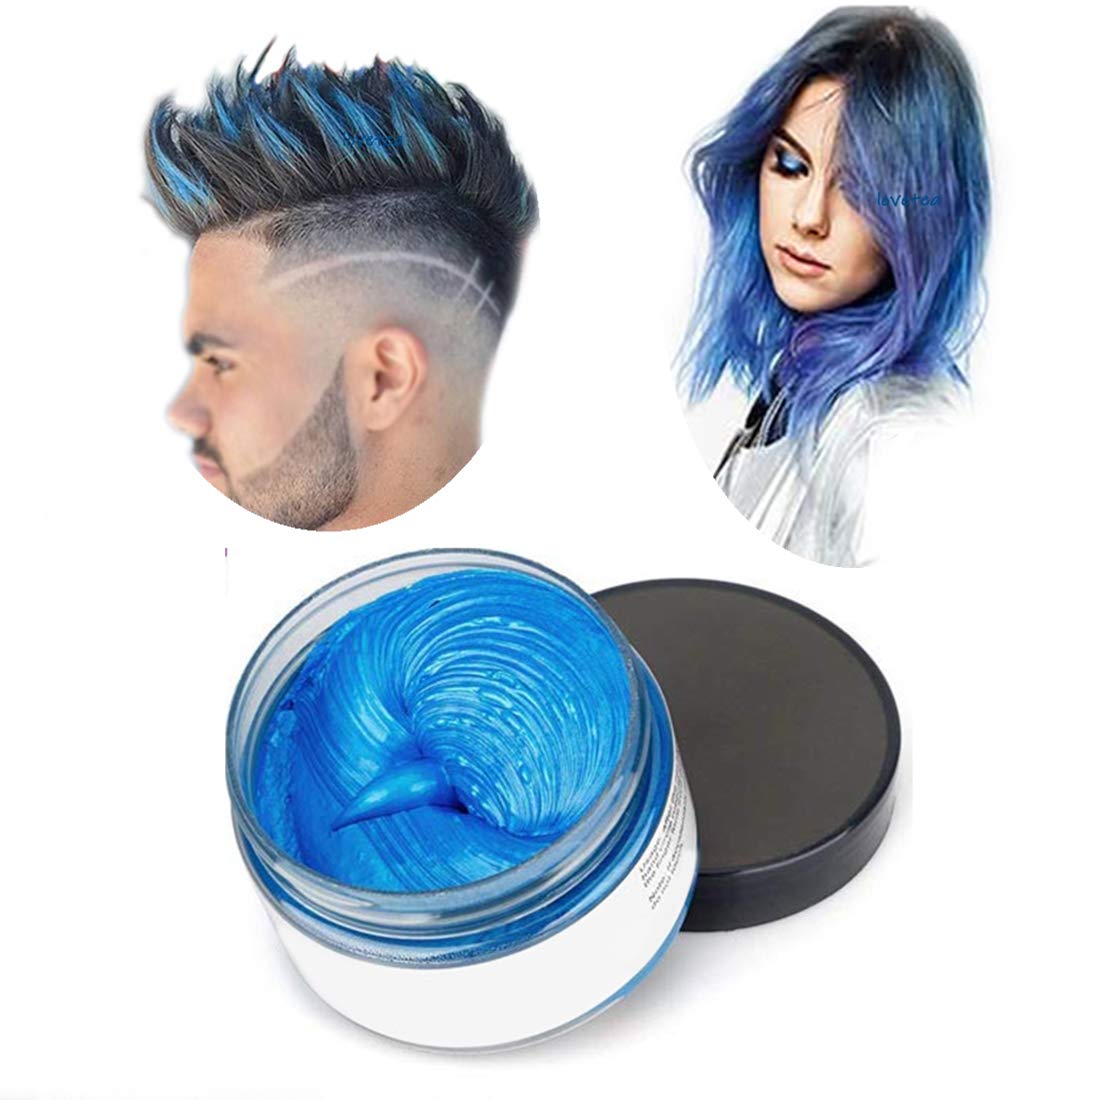 Hair Color Wax M5091One-time Temporary Modeling Natural Color Hair Dye Wax Natural Matte Hairstyle for party.Cosplay, Masquerade,Nightclub,Halloween